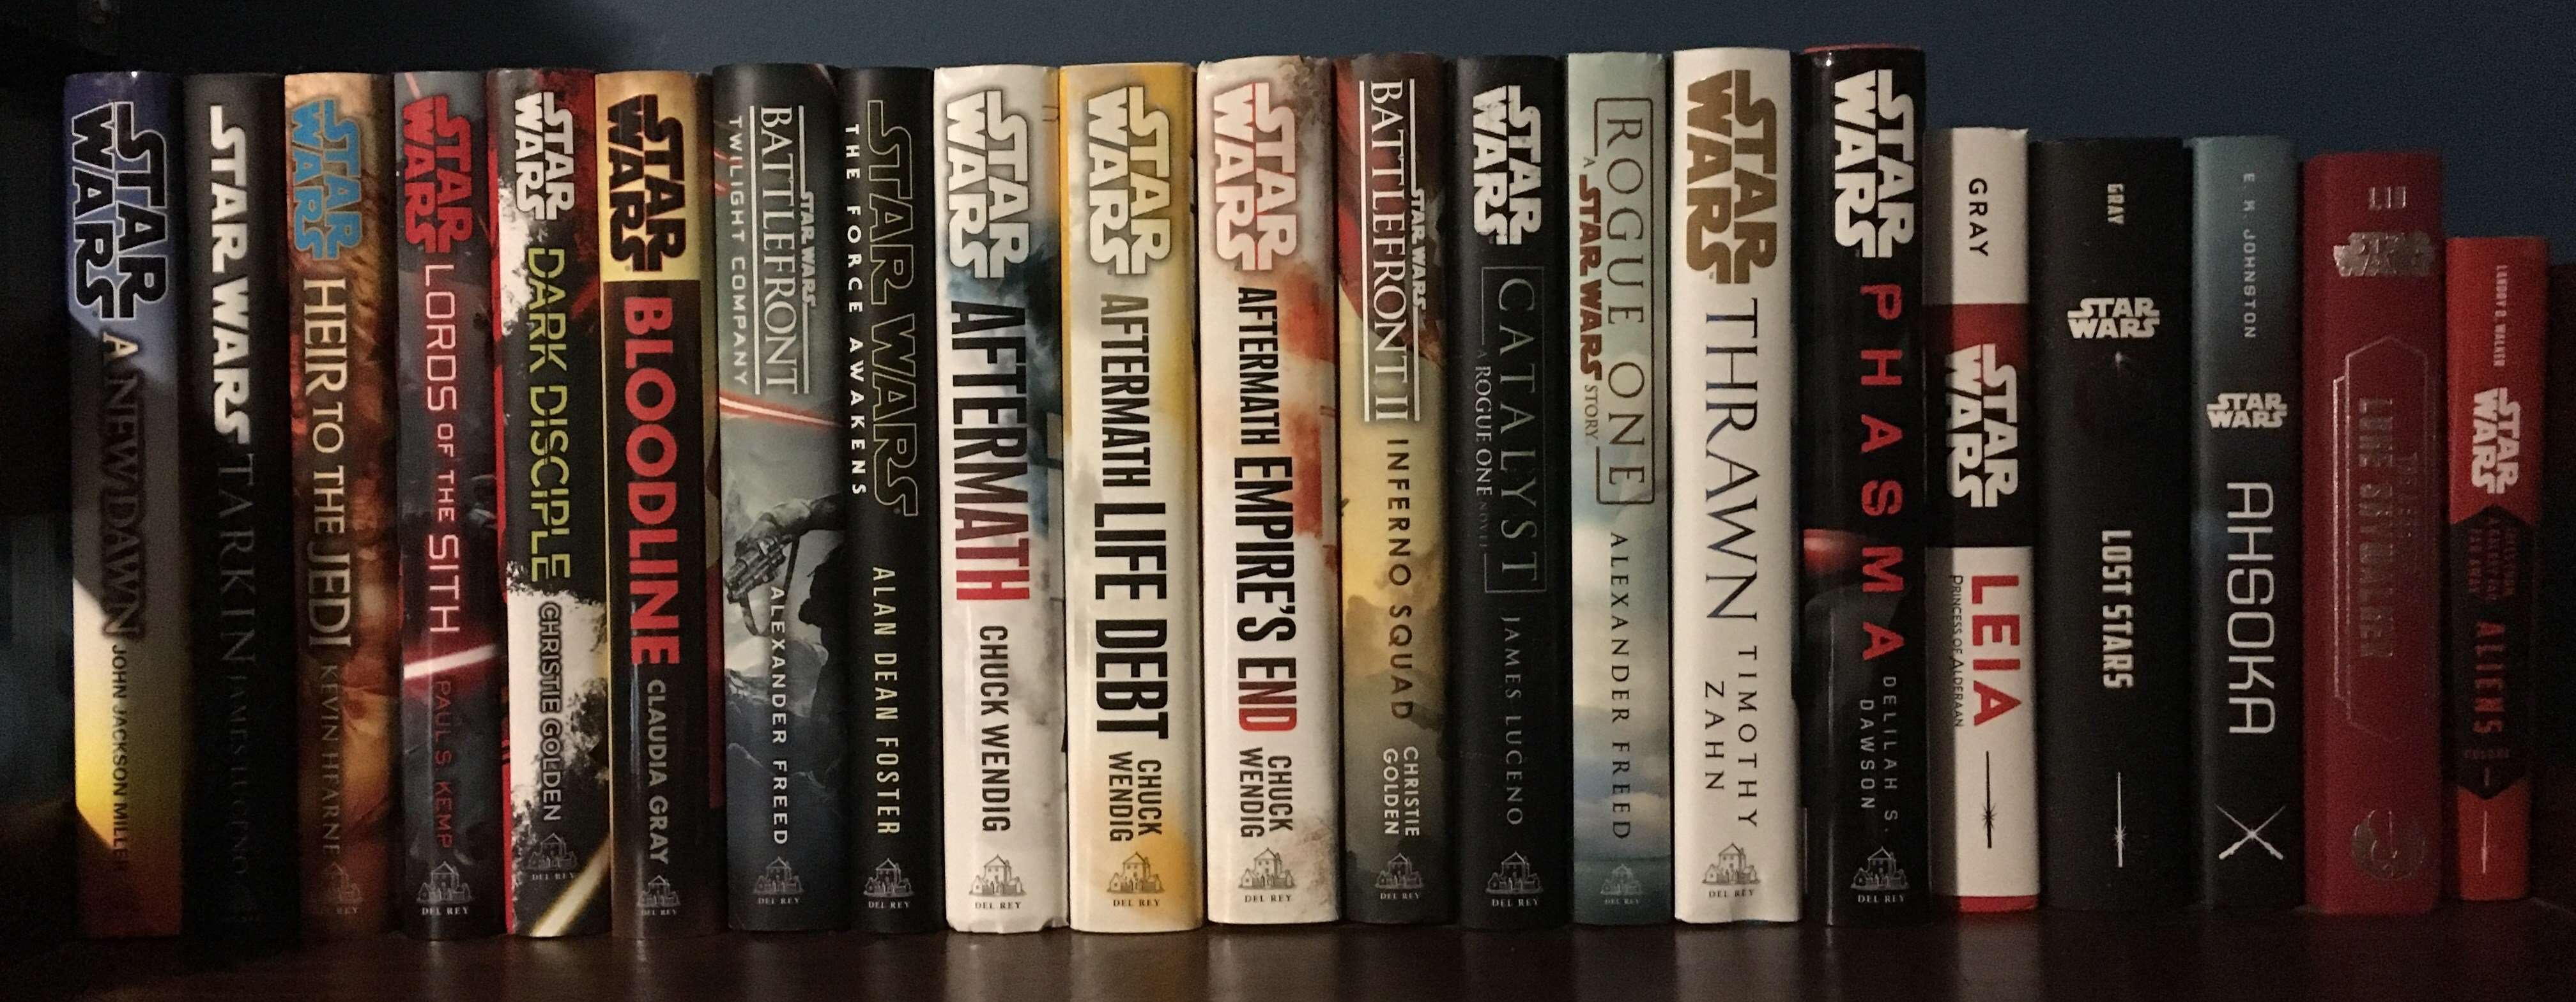 image for A complete guide to the novels of the current Star Wars canon